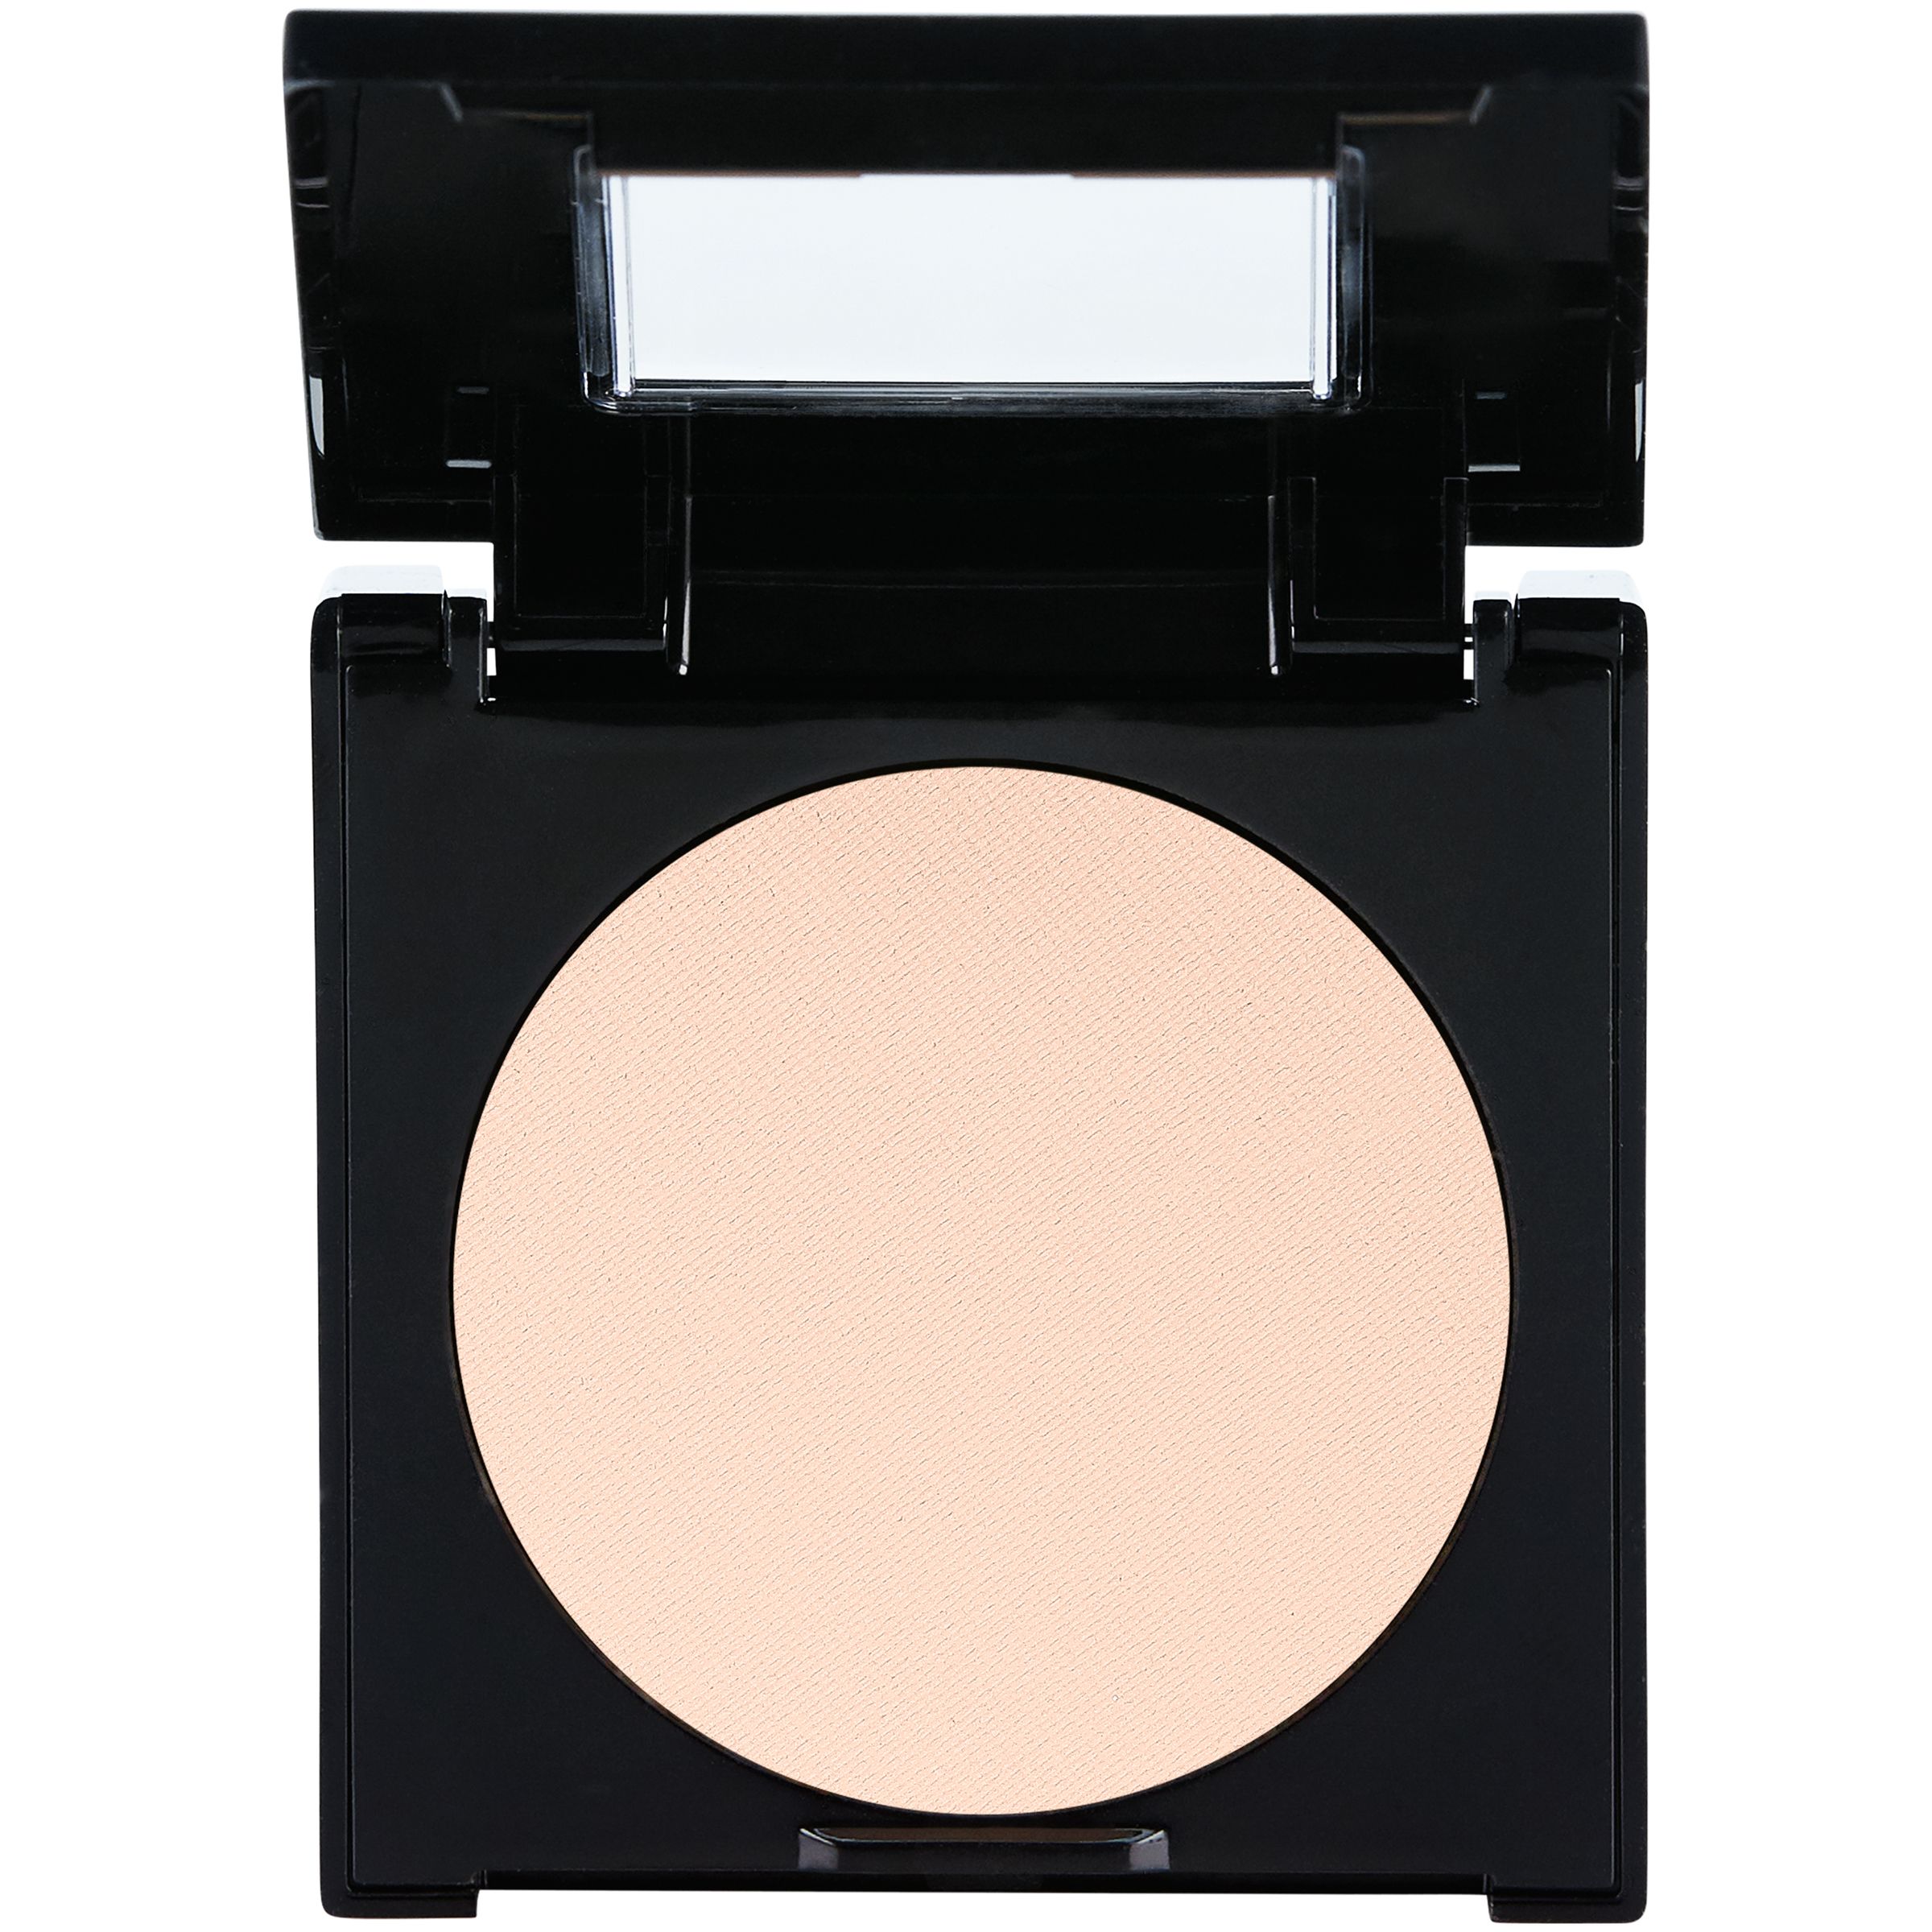 Maybelline Fit Me Set + Smooth Powder, Nude Beige - image 3 of 7